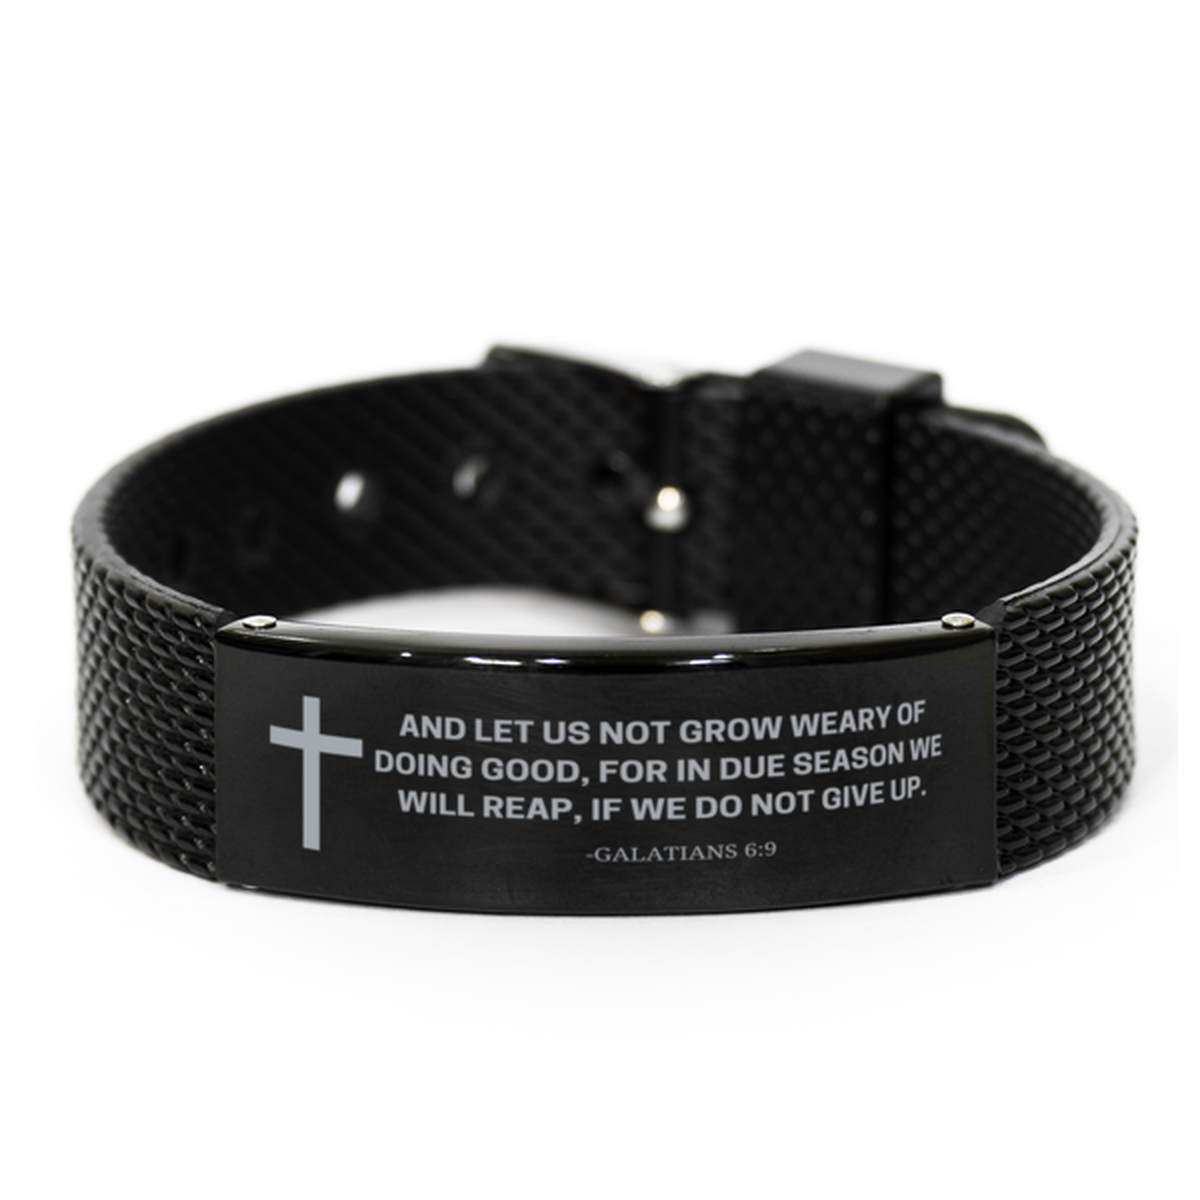 Baptism Gifts For Teenage Boys Girls, Christian Bible Verse Black Shark Mesh Bracelet, And let us not grow weary, Catholic Confirmation Gifts for Son, Godson, Grandson, Nephew